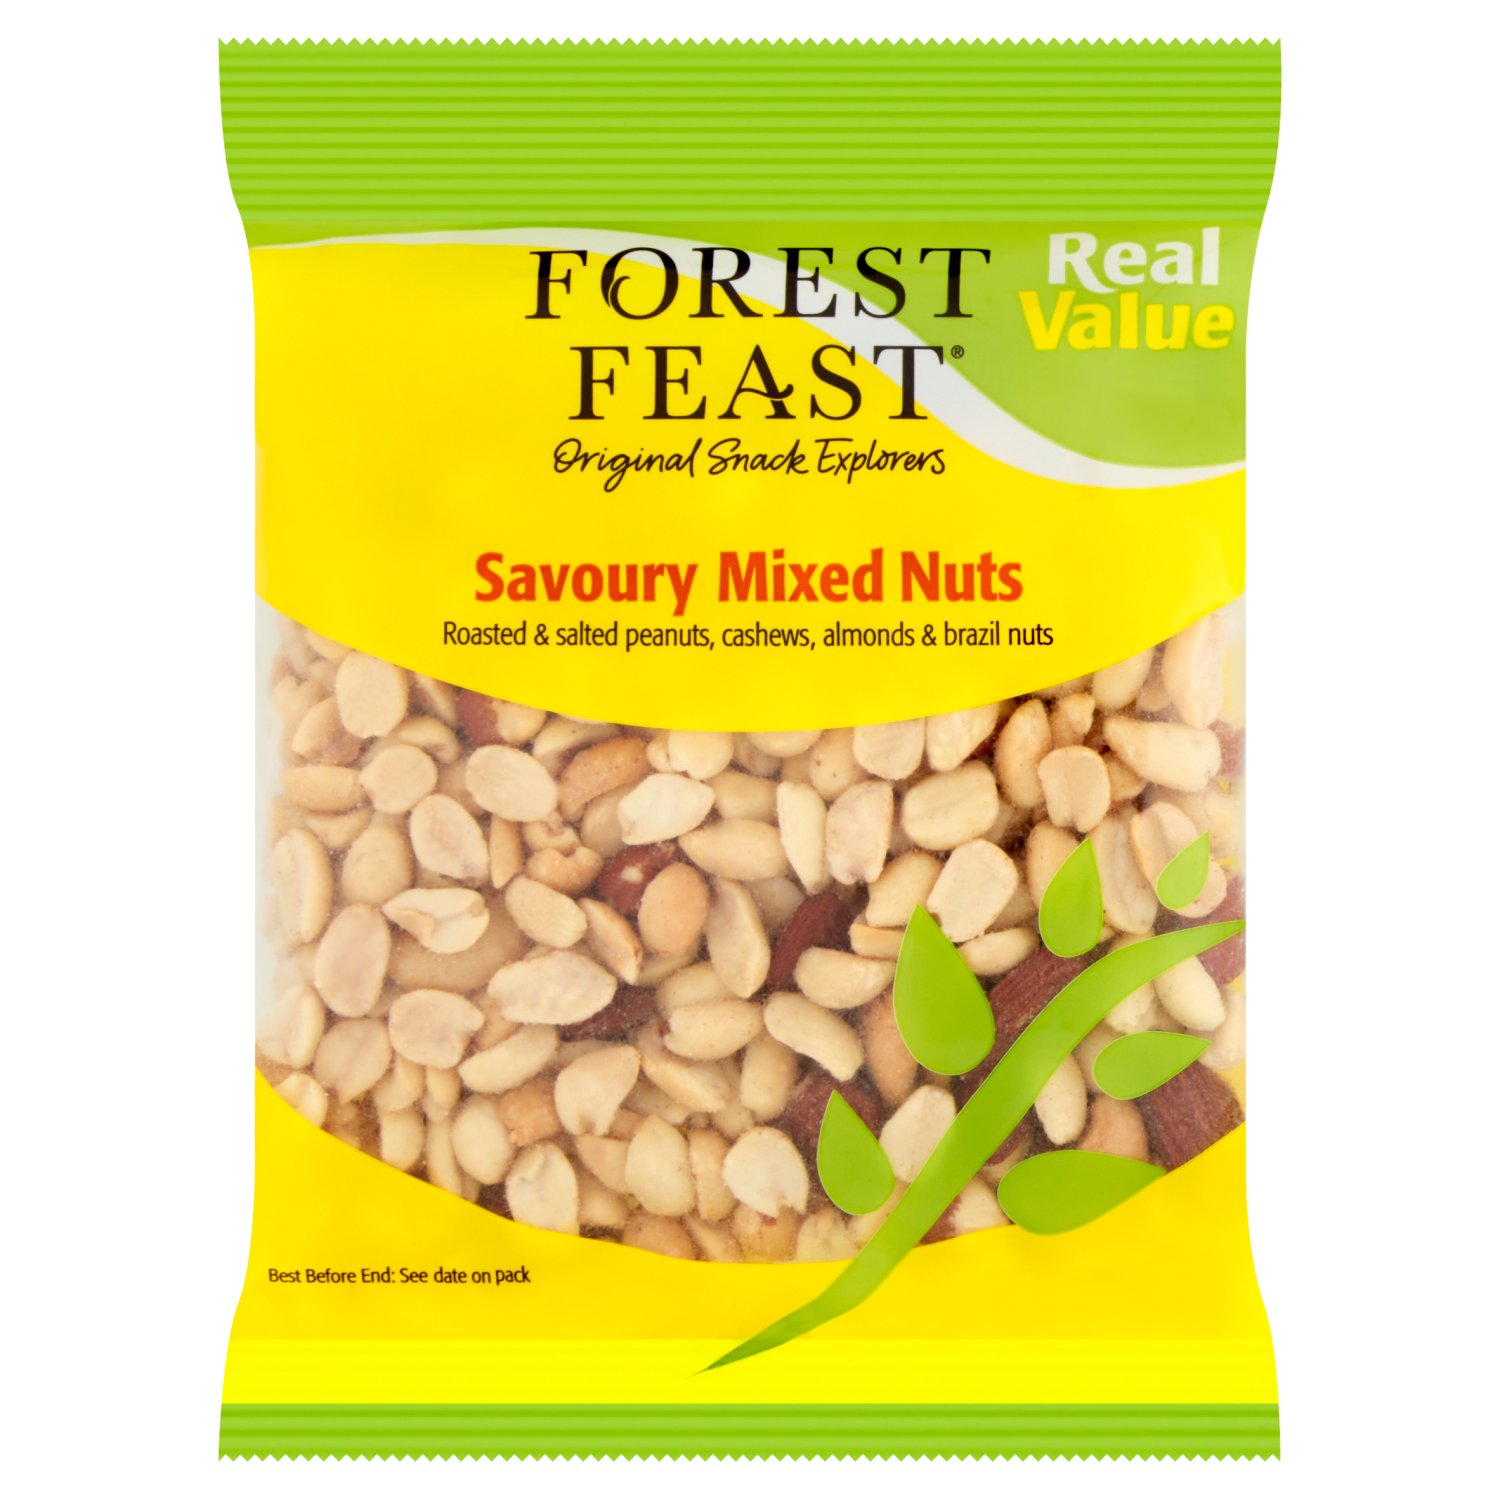 Real Value Savoury Mixed Nuts (170 g)